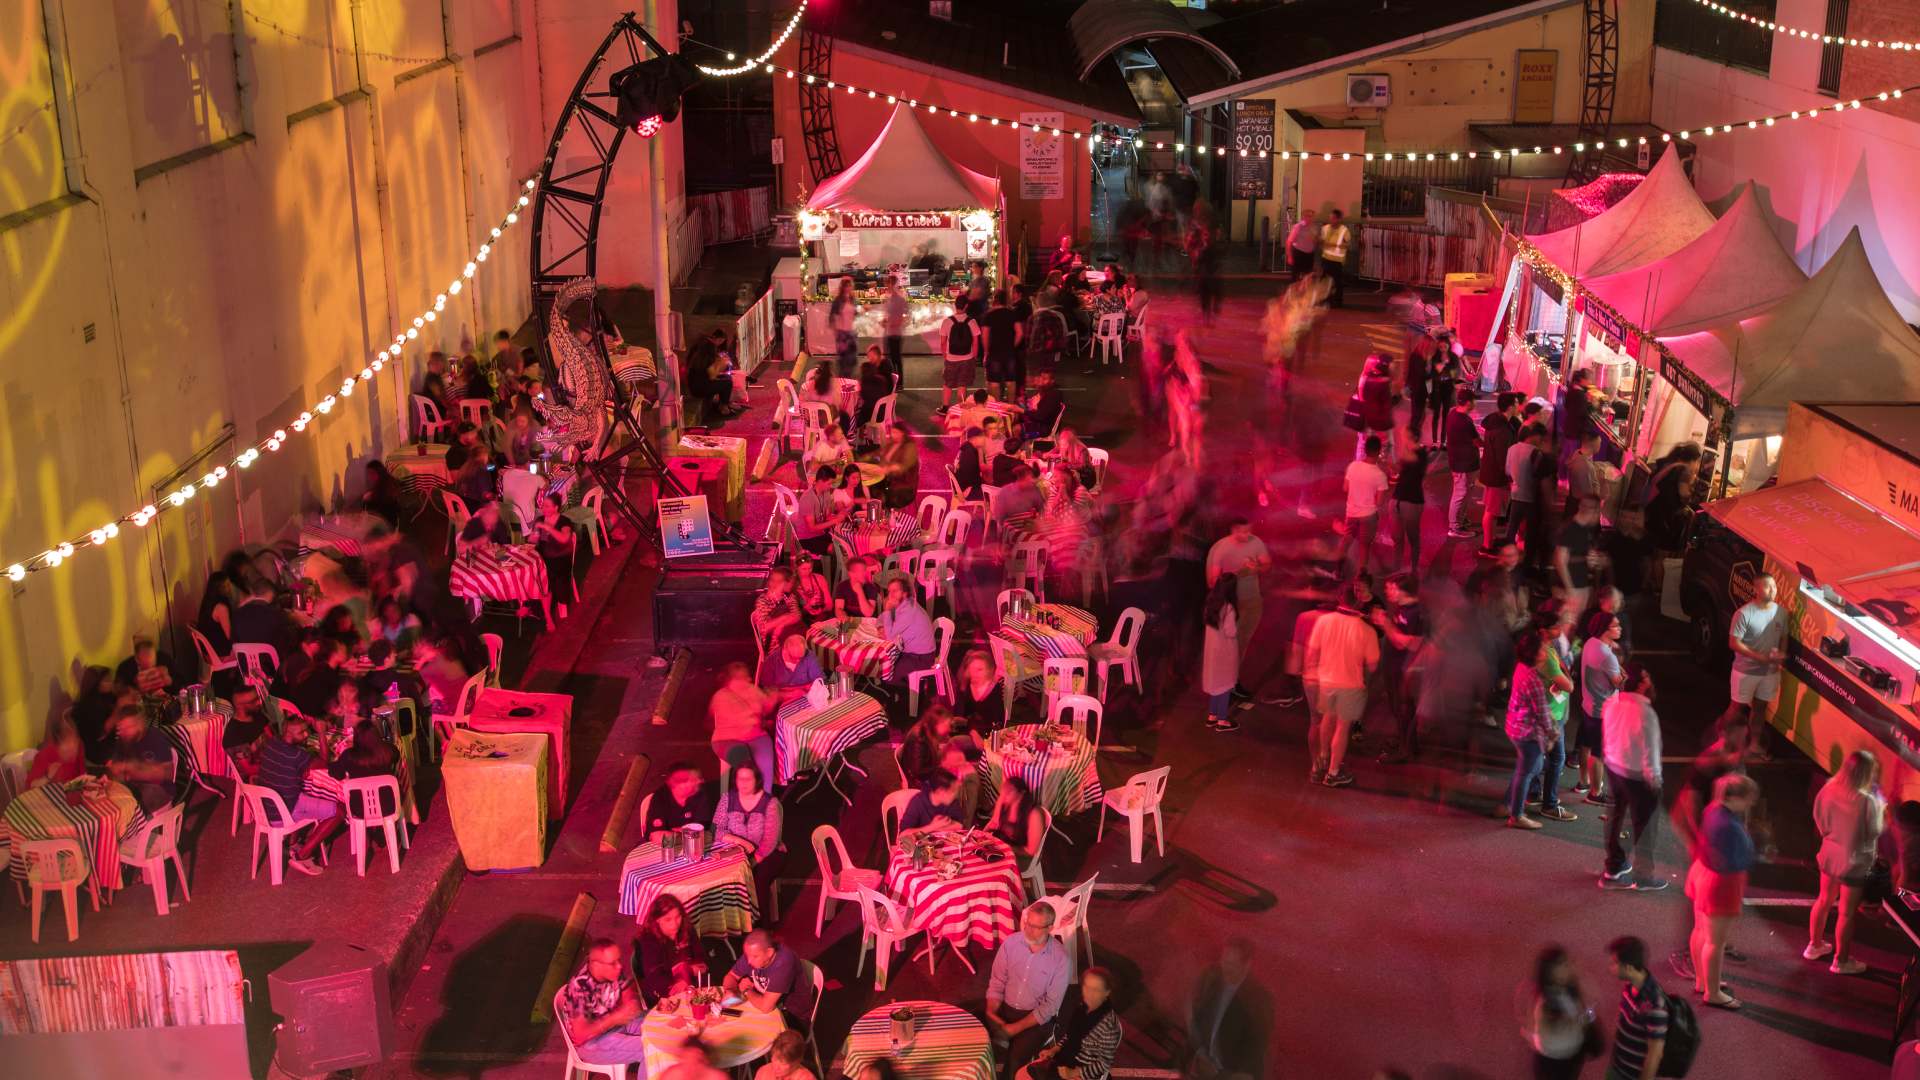 A Gig Space, Roller Rink and Openair Cinema Are All Popping Up As Part of Parramatta Nights